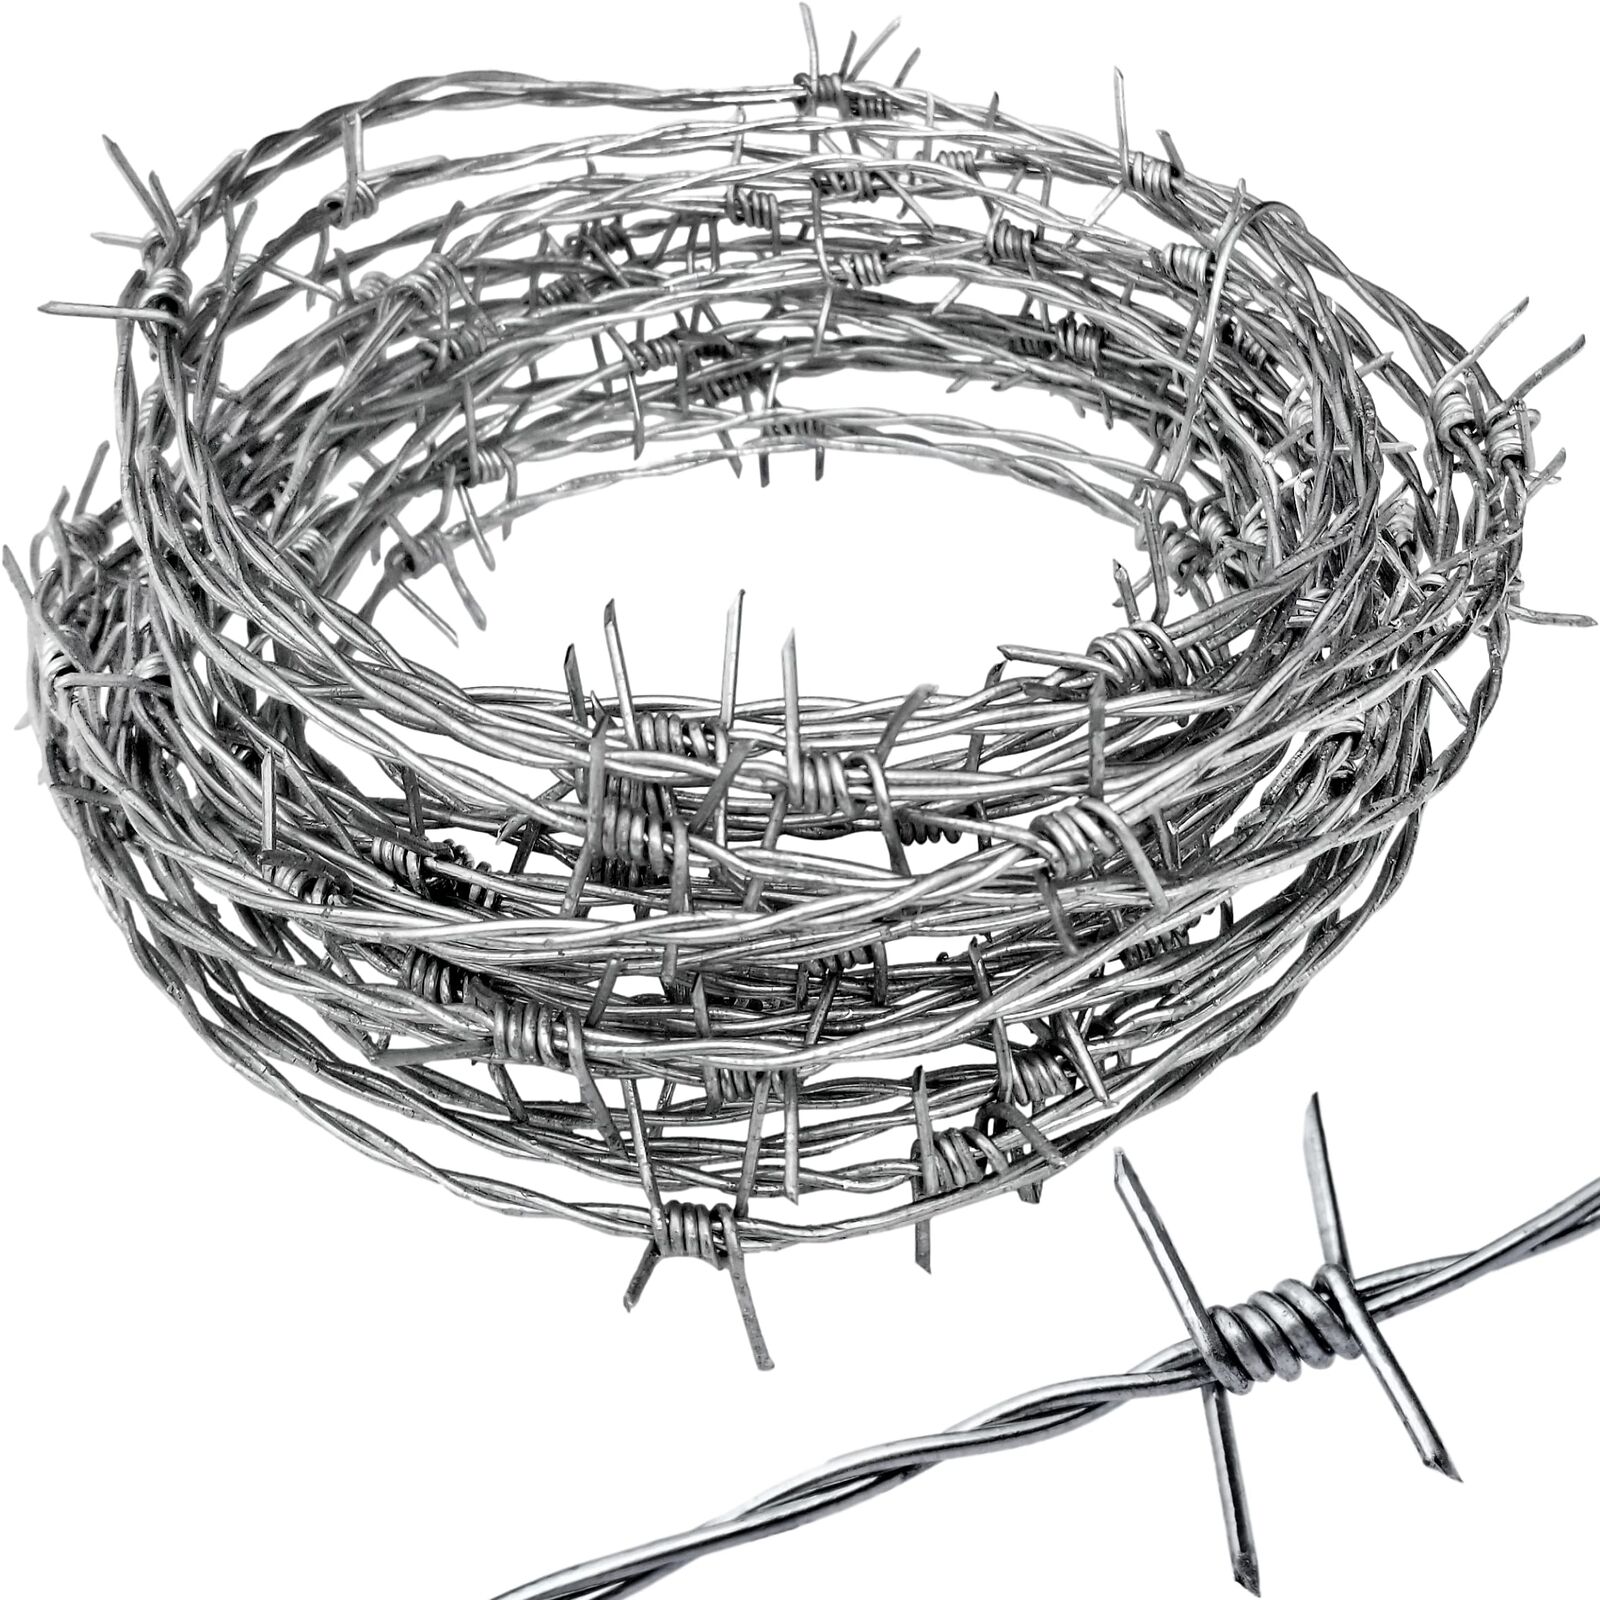 Real Barbed Wire 25Ft 18 Gauge - Great for Crafts Fences and Critter Deterrent